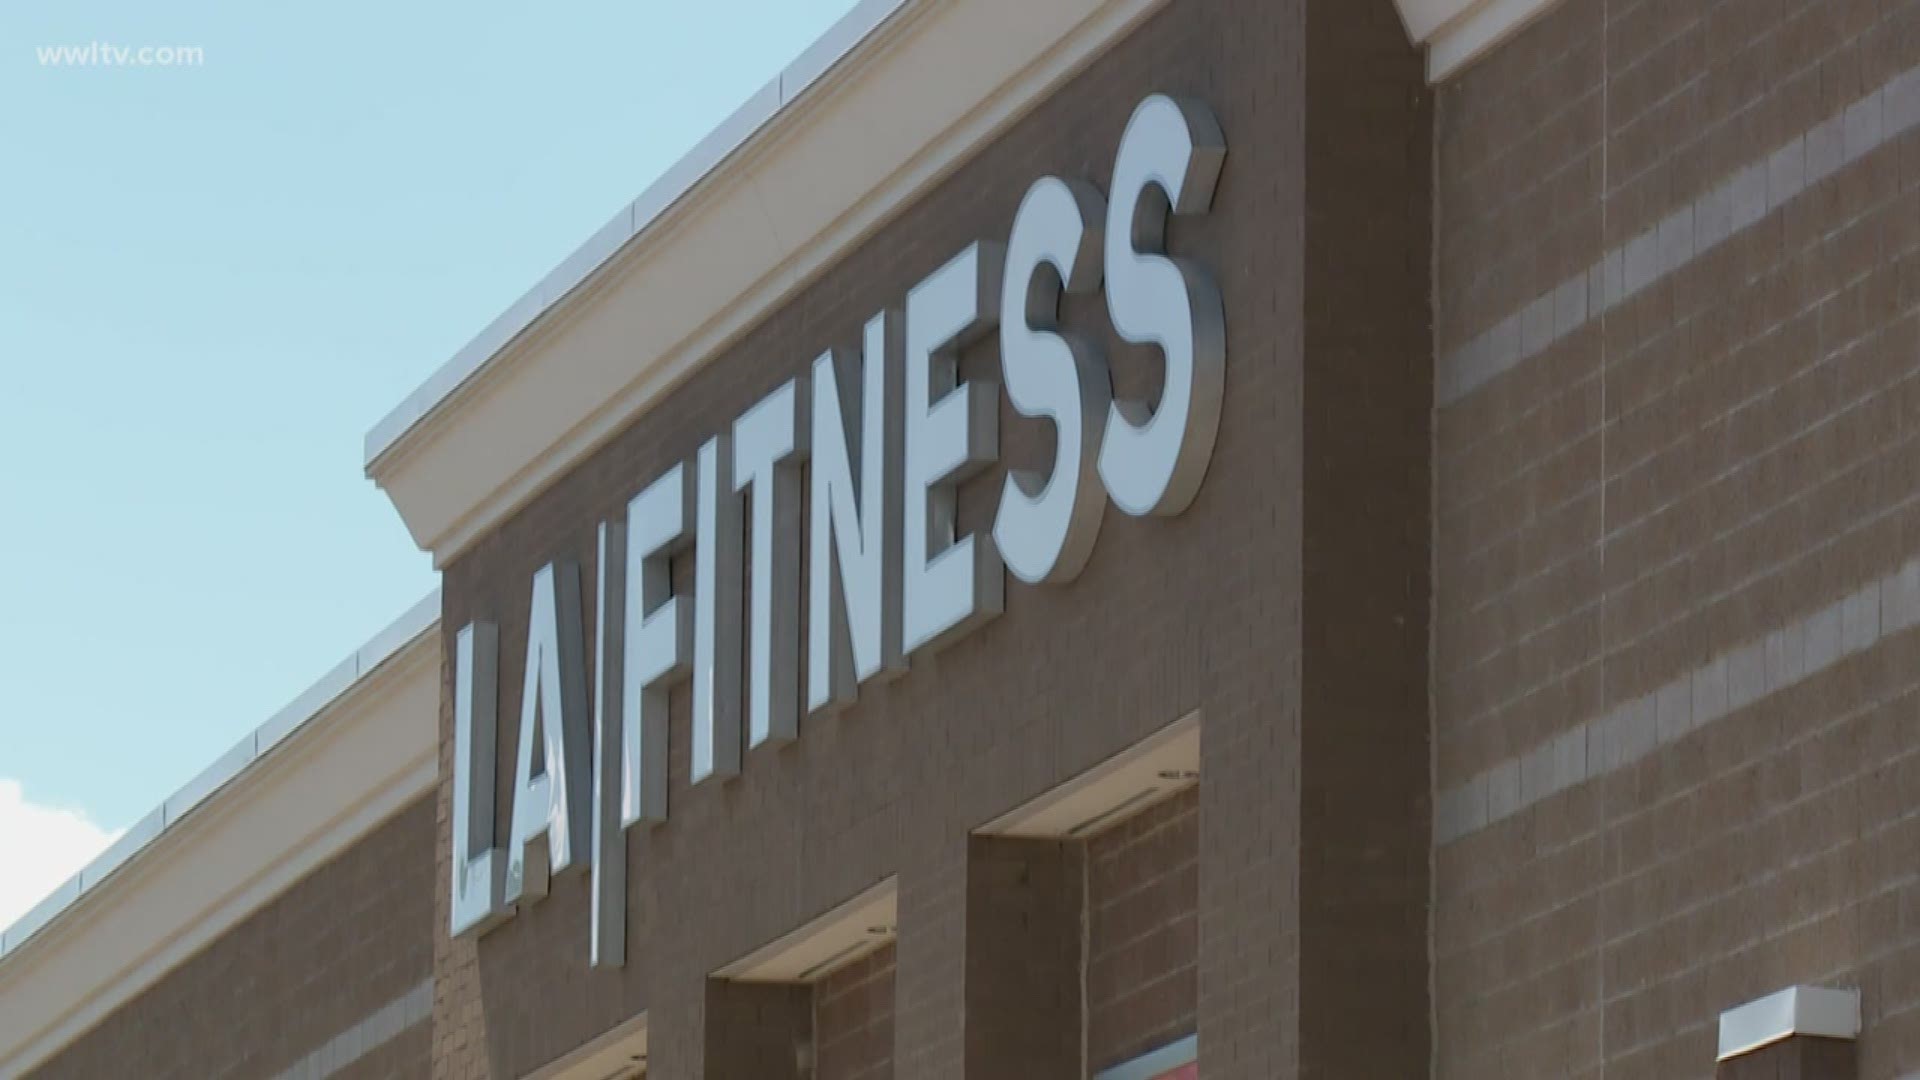 Two managers at the LA Fitness health club in Slidell have been removed from their positions as the company re-visits its investigation into allegations they discriminated against a former employee because of her race.